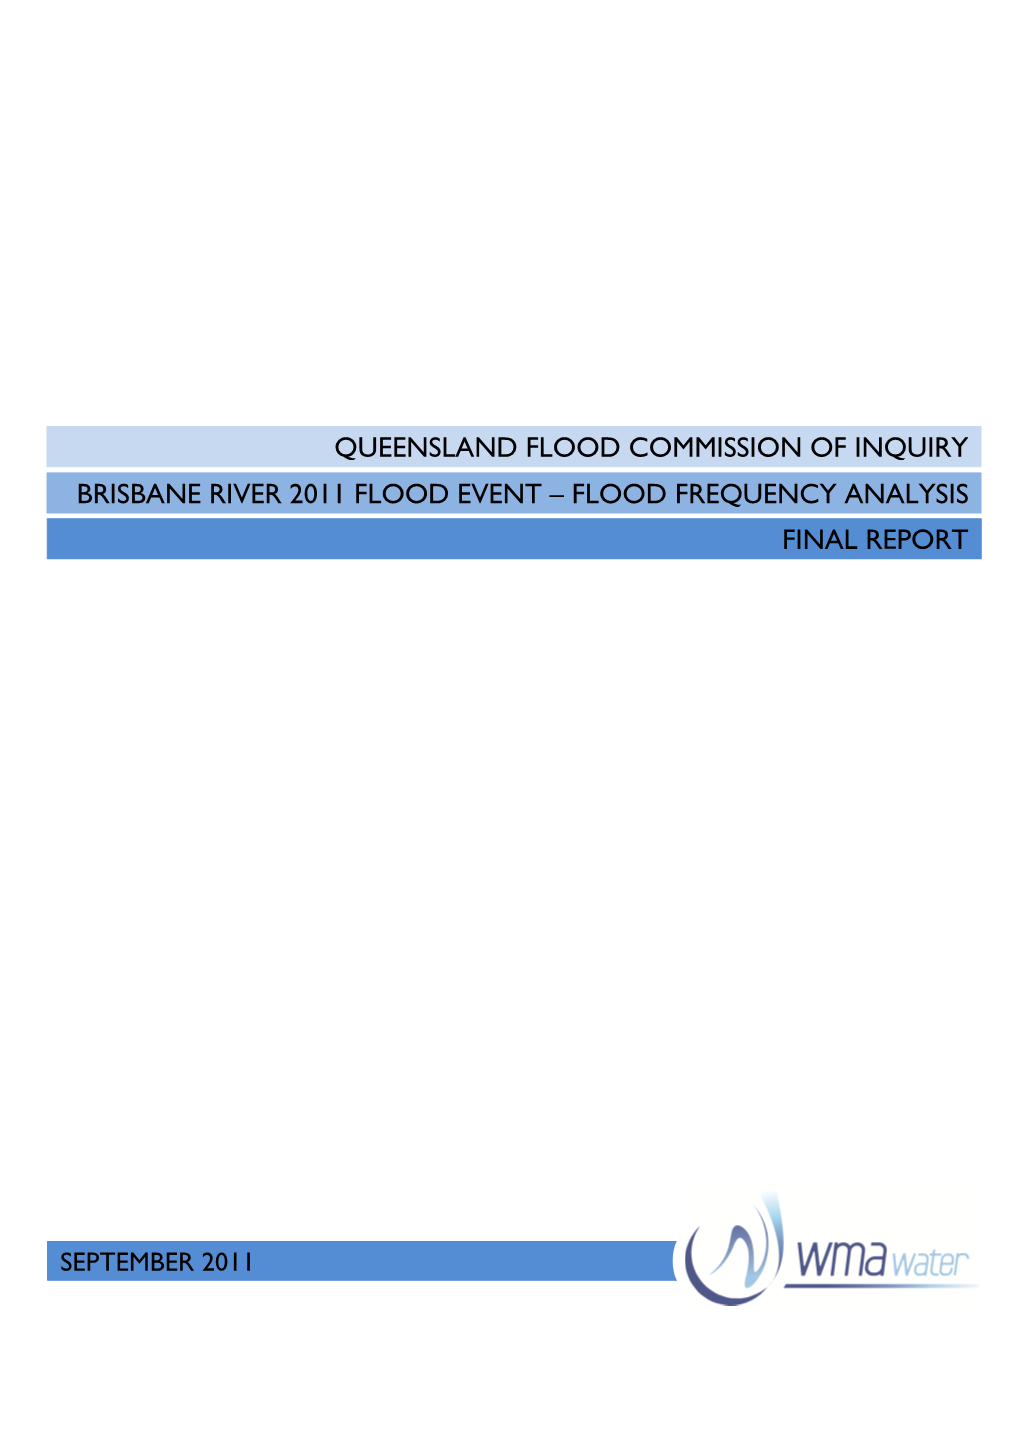 Brisbane River 2011 Flood Event – Flood Frequency Analysis Final Report